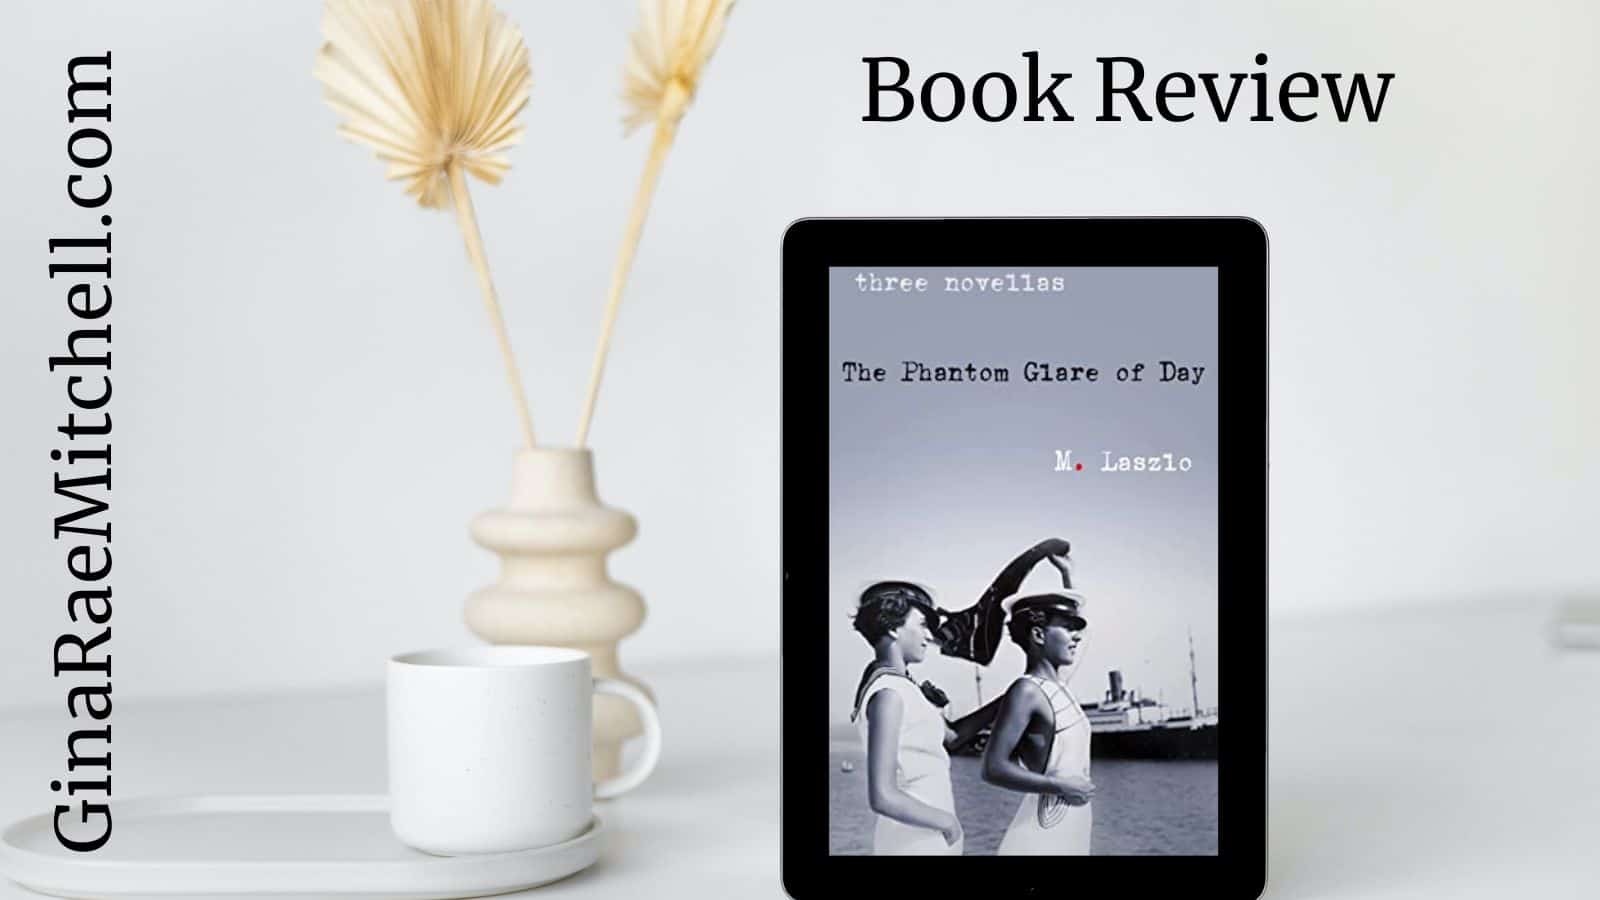 The Phantom Glare of Day by M. Laszlo | Book Review, Author Interview | Release Day-November 1, 2022